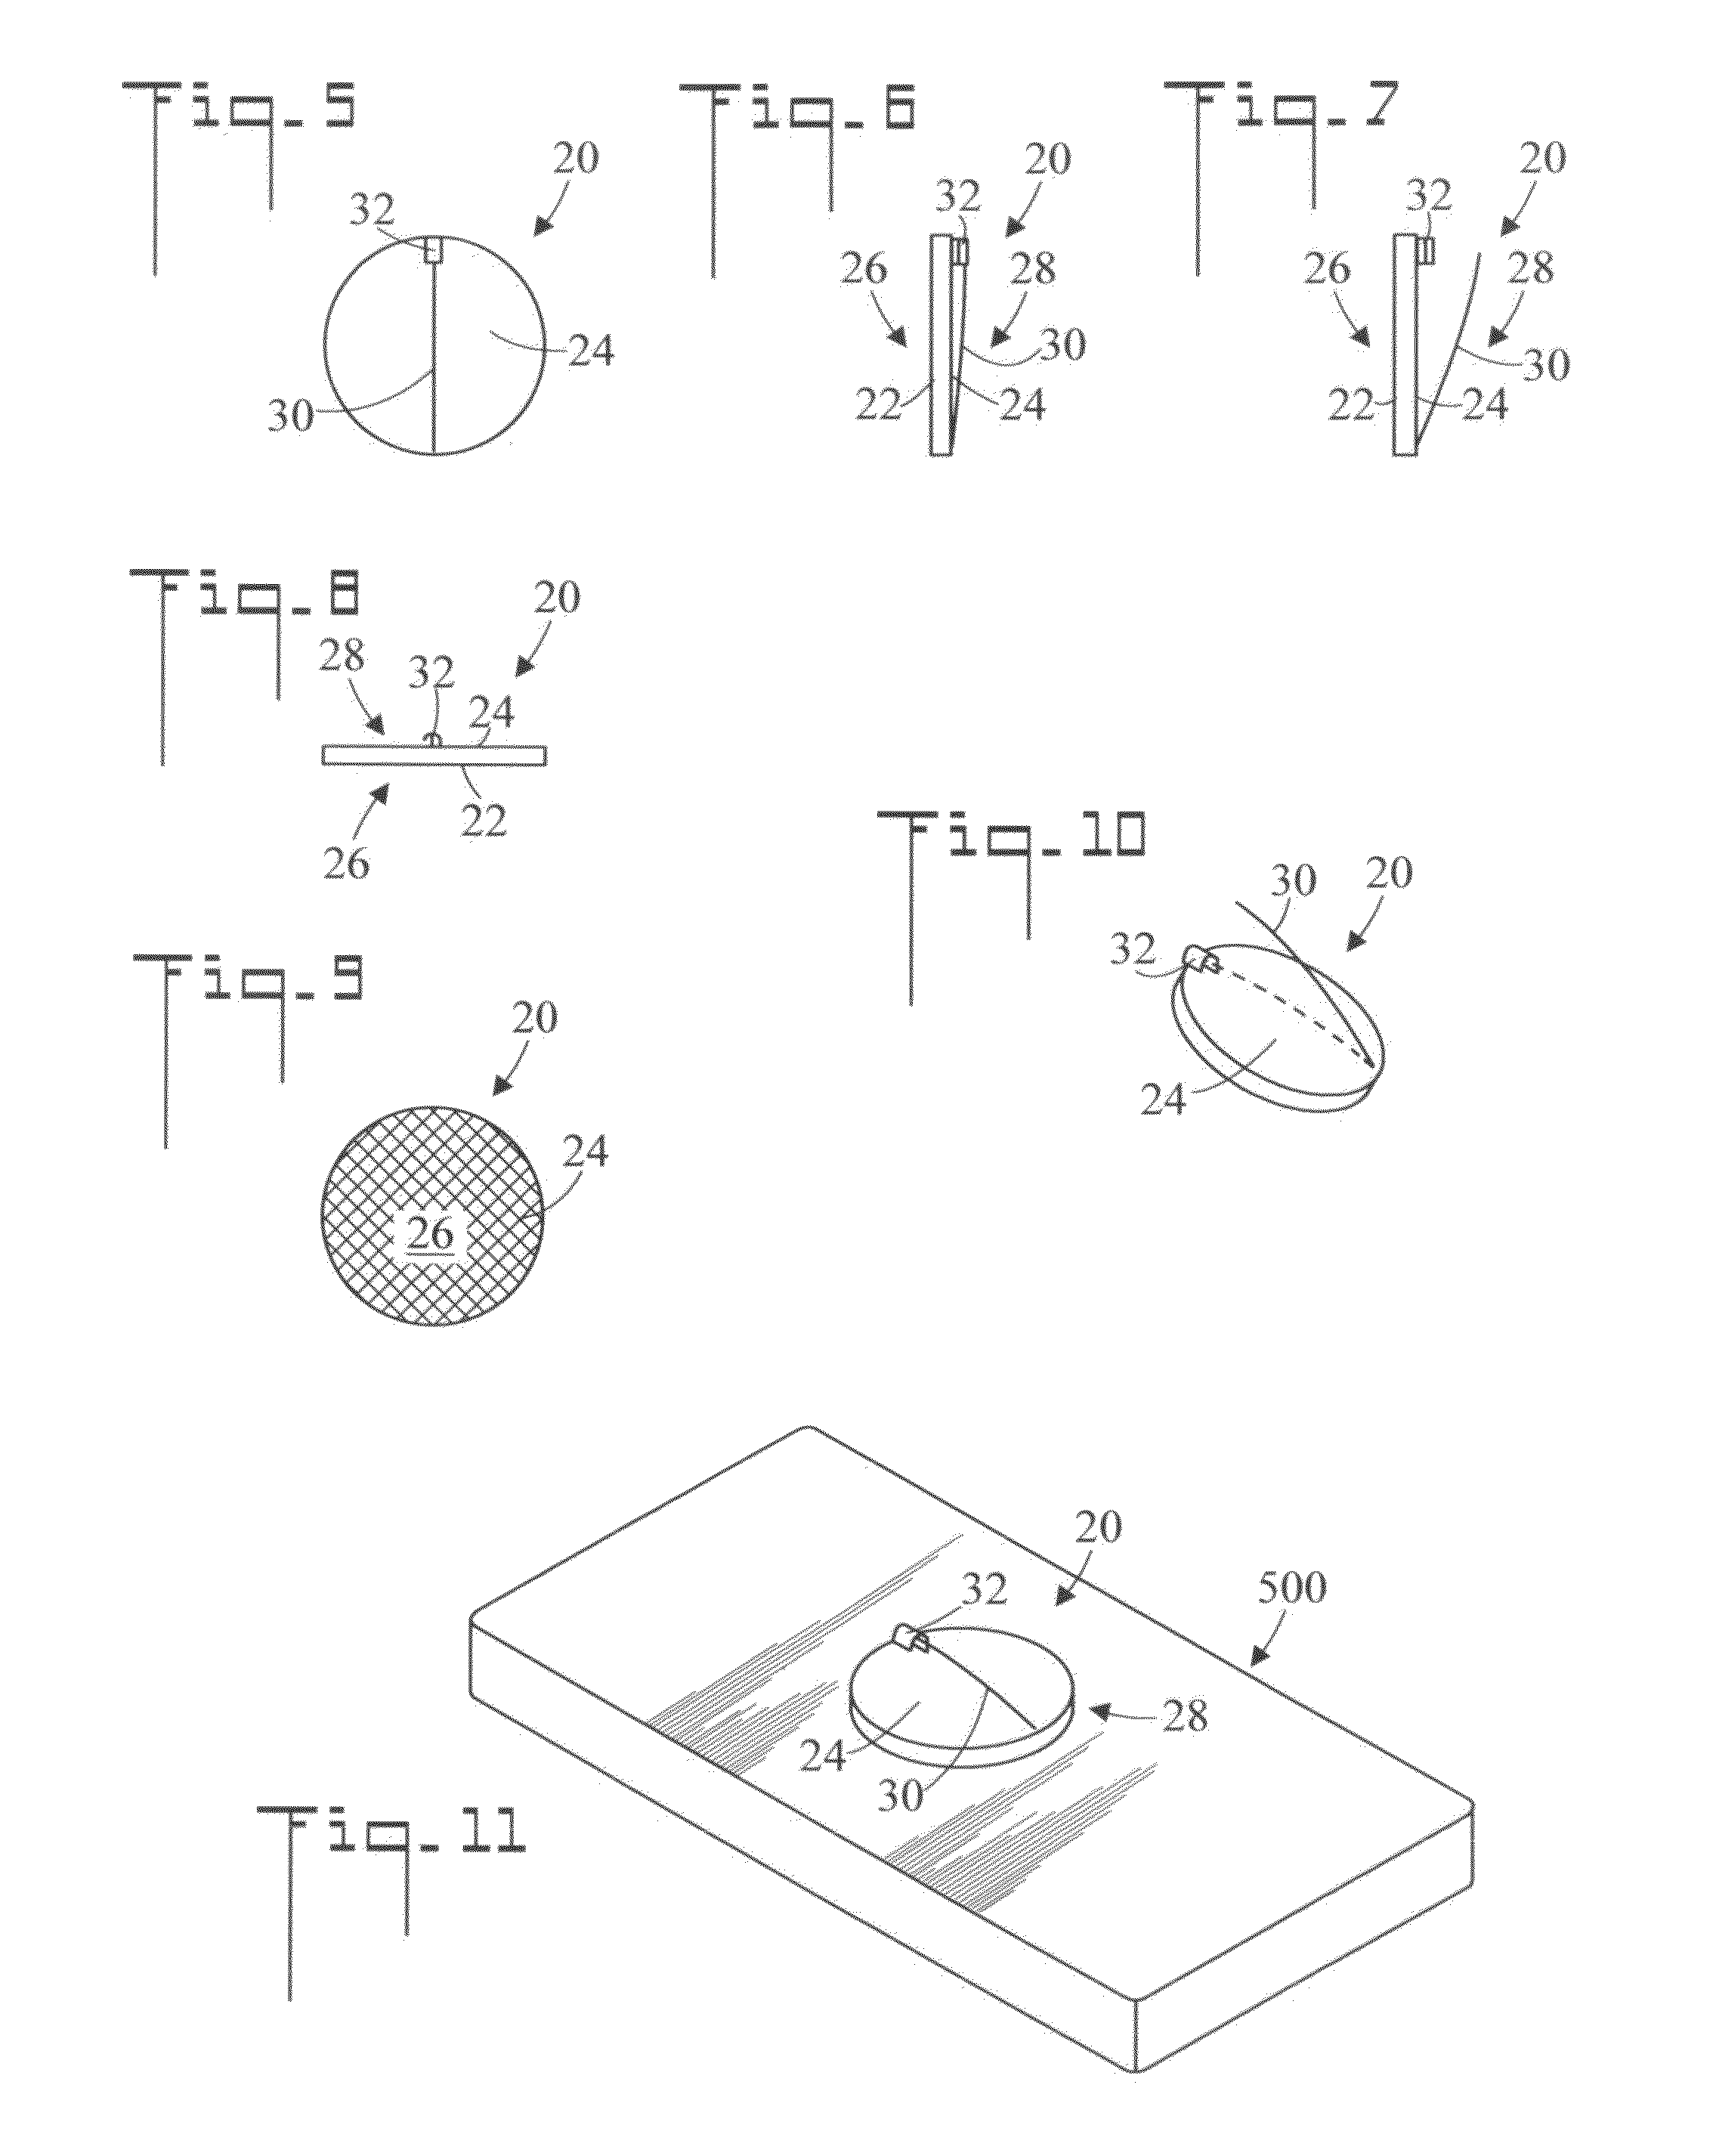 Method for attaching a hand held electronic device to a soft object and coupling therefor